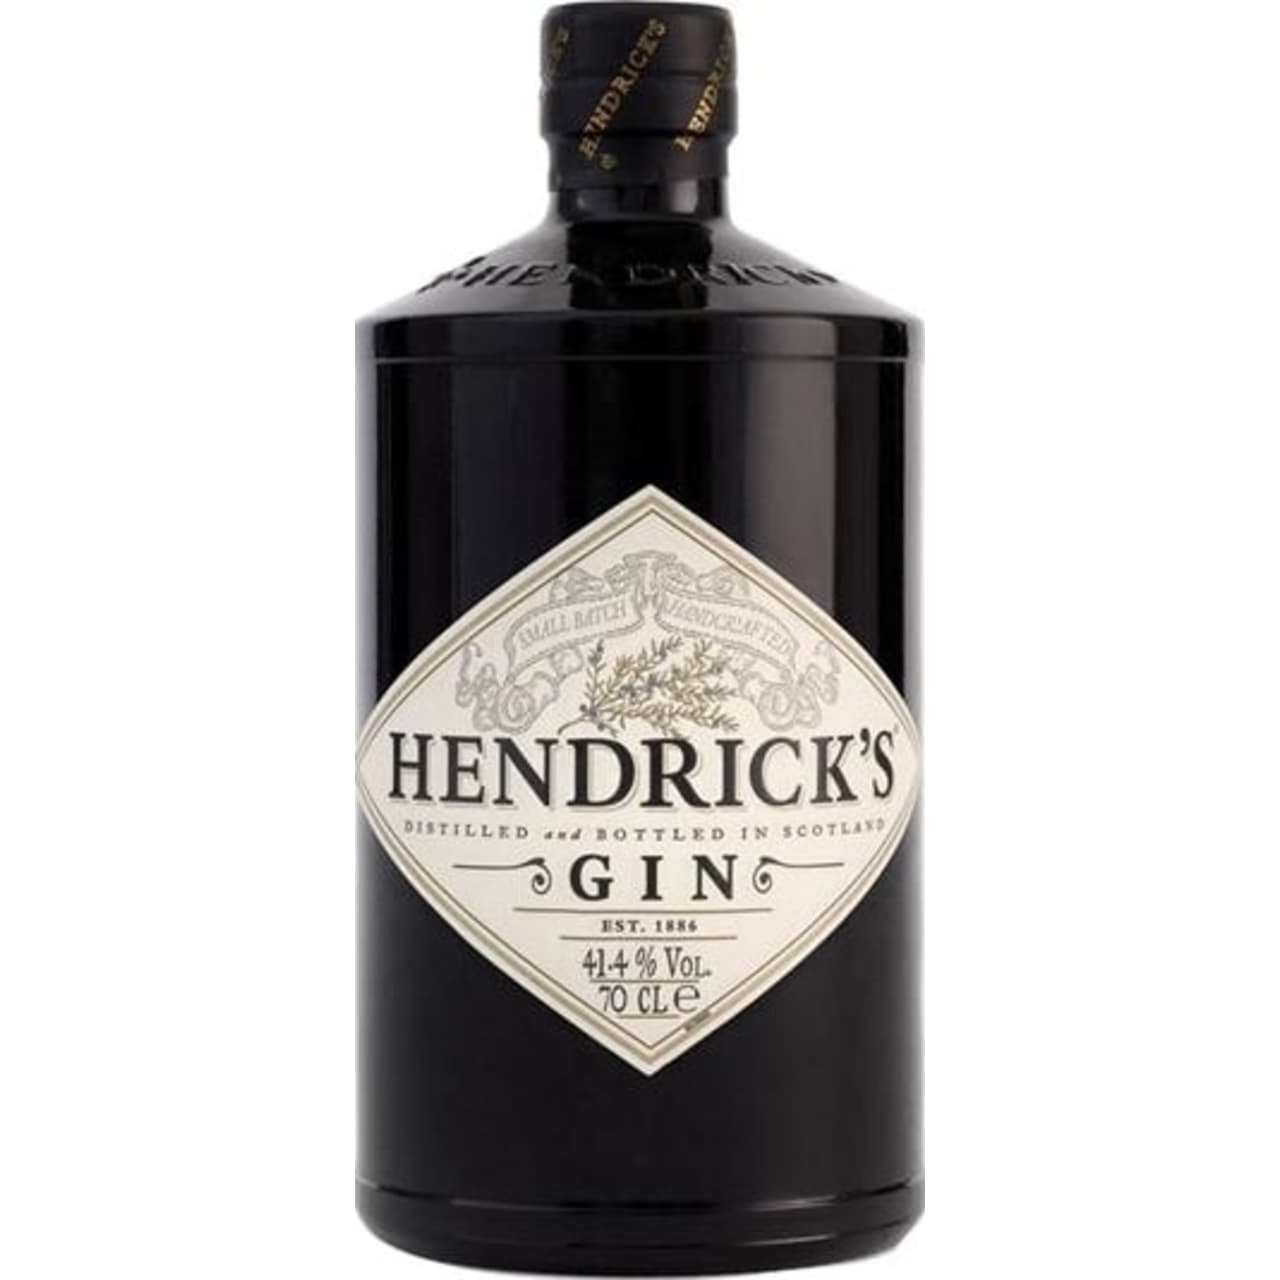 Hendrick’s gin is infused with the essences of rose and cucumber, delectably supported by no less than 11 botanicals from the four corners of the world. This concoction produces a refreshing gin with a delightfully floral aroma. Hendrick’s Gin is distilled in not one but two utterly dissimilar sorts of still.